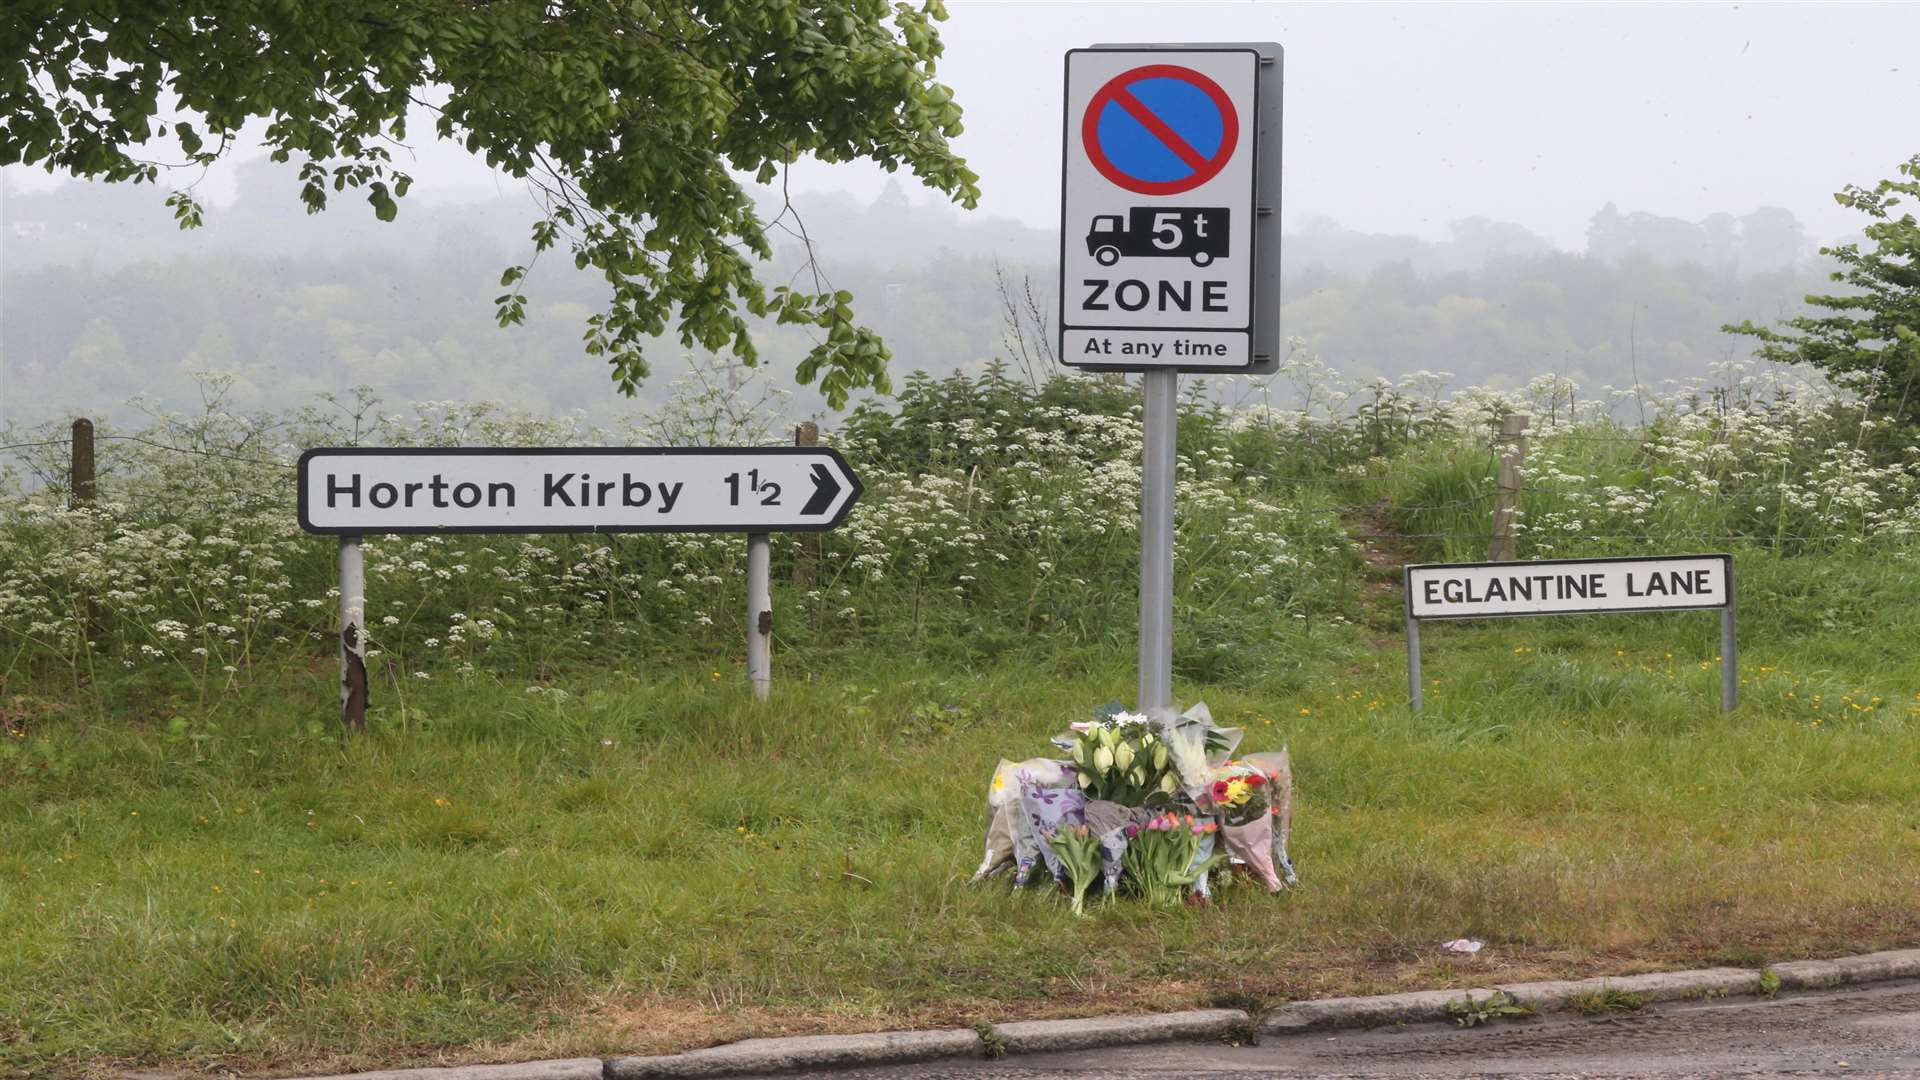 Flowers mark the spot of a fatal accident in Farningham at Eglantine Lane, off the A20 going towards Horton Kirby